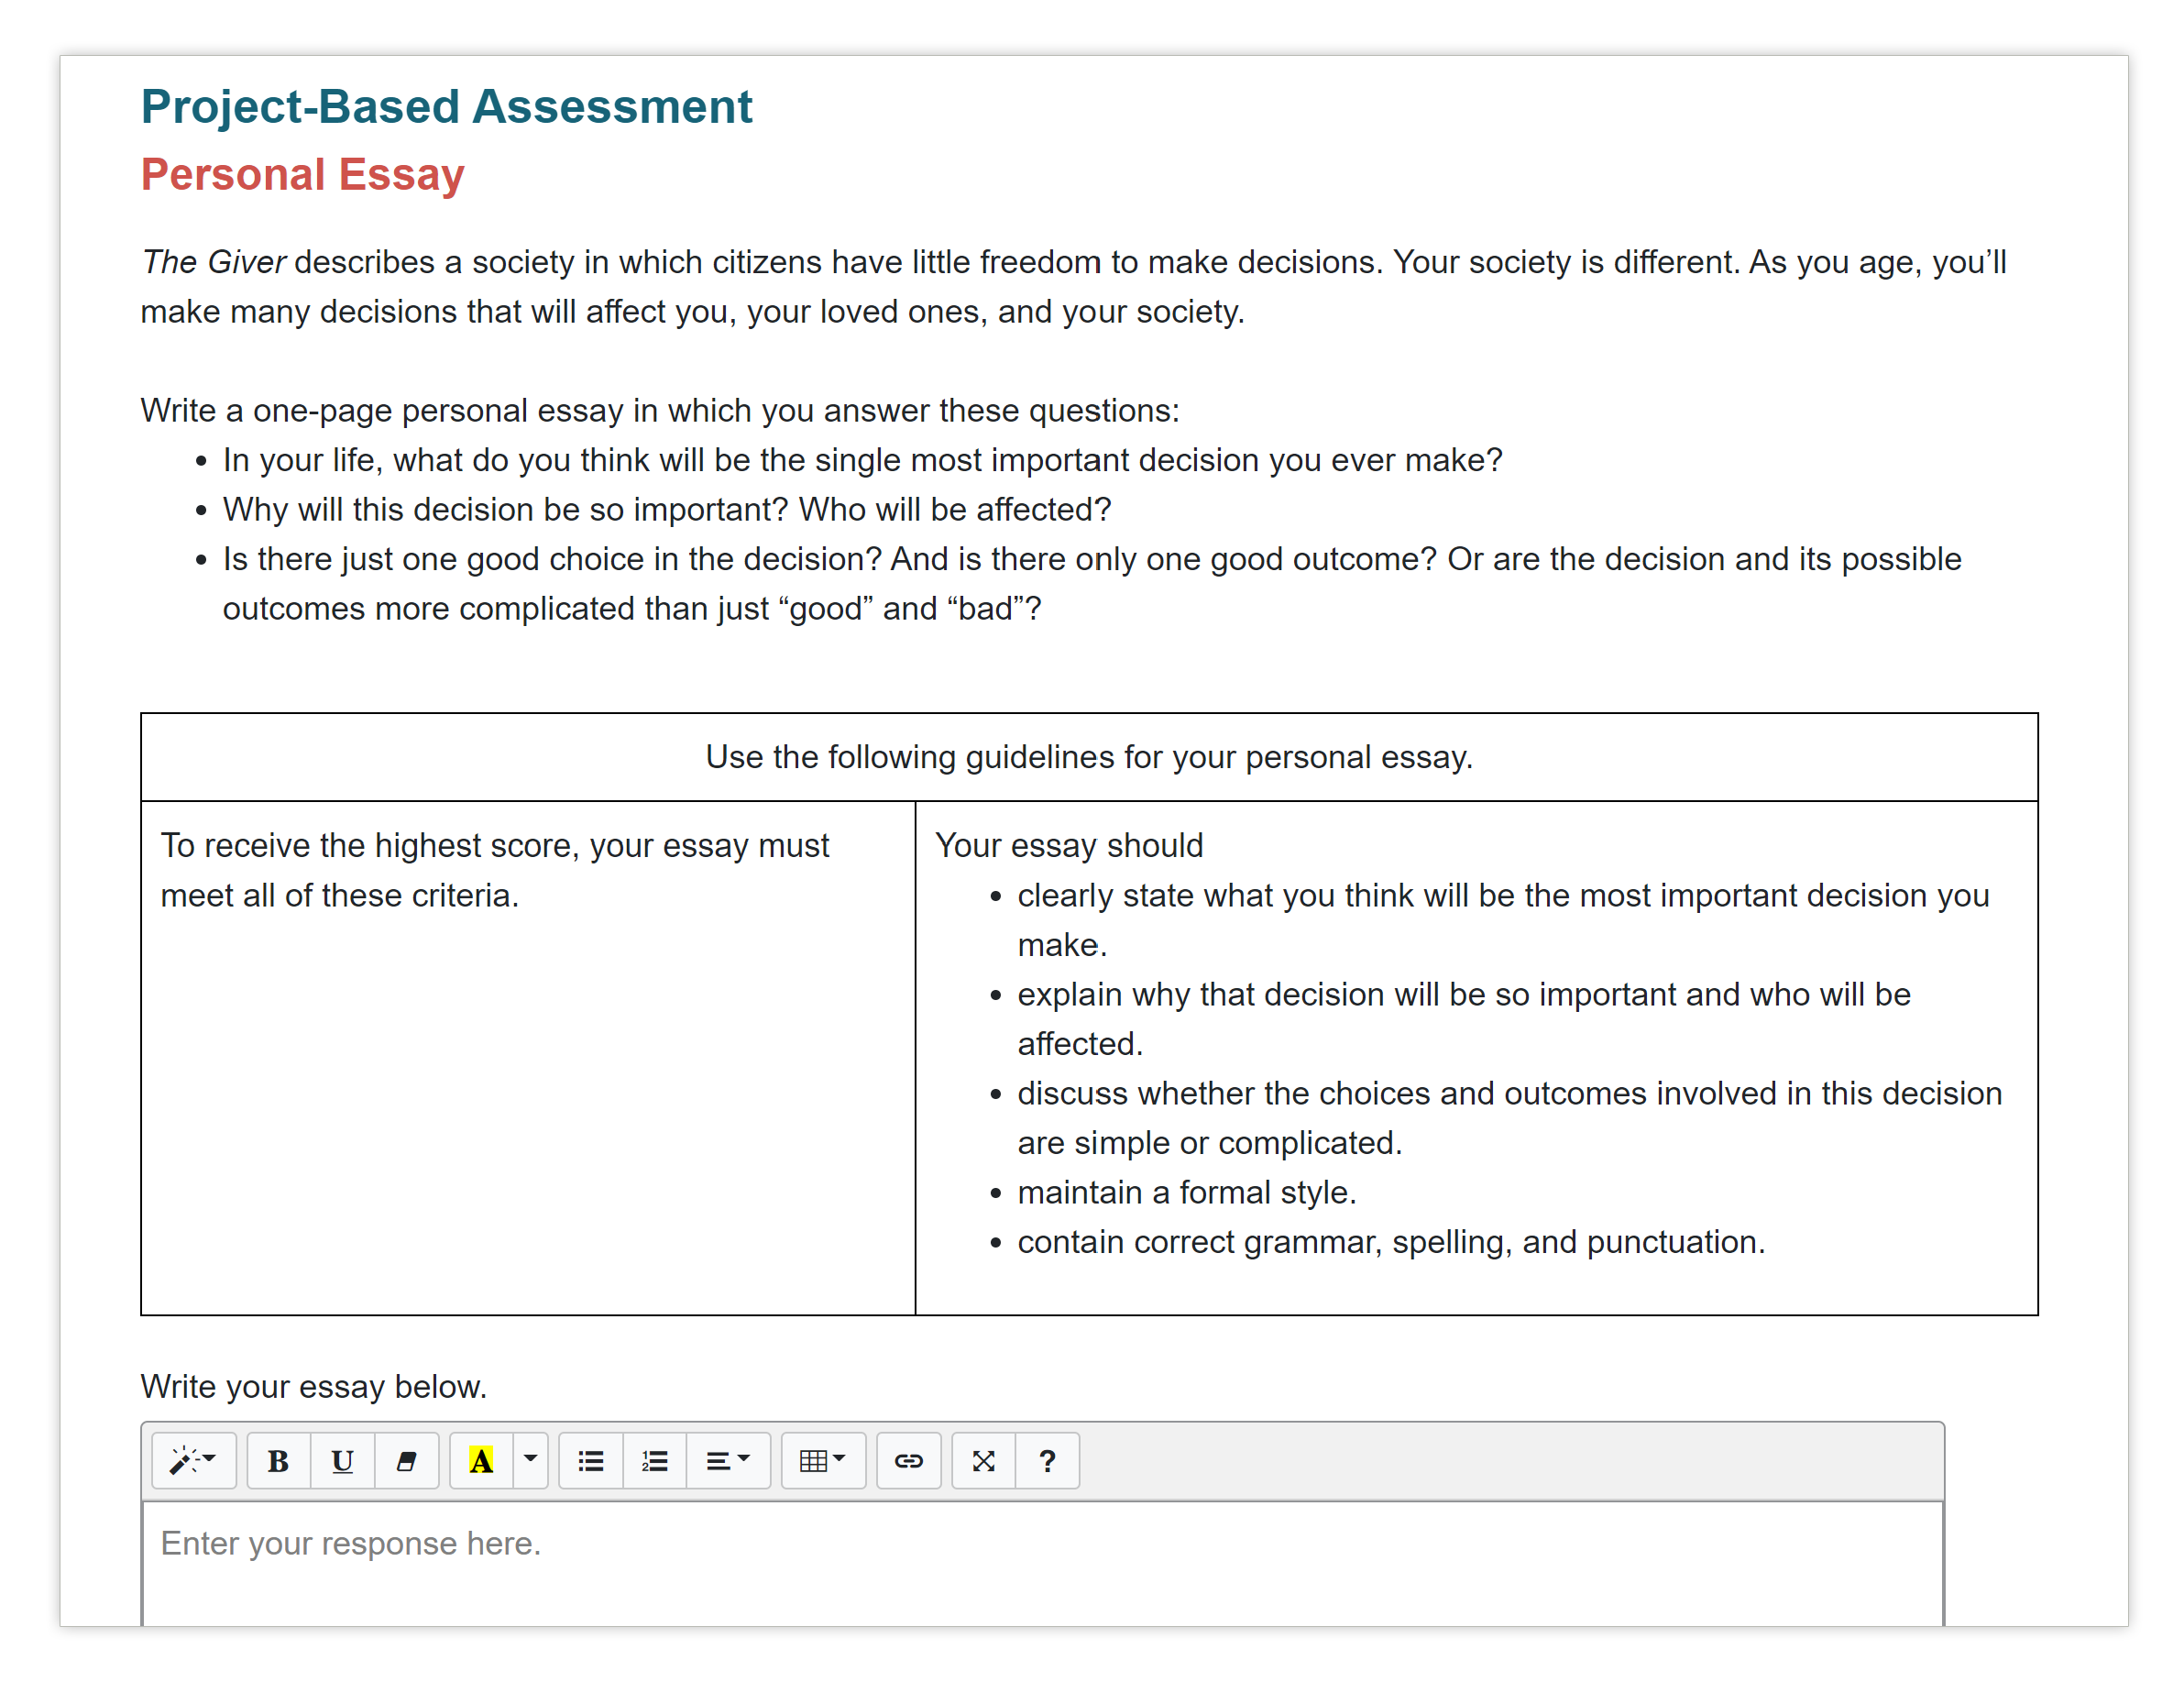 image of project-based assessment personal essay